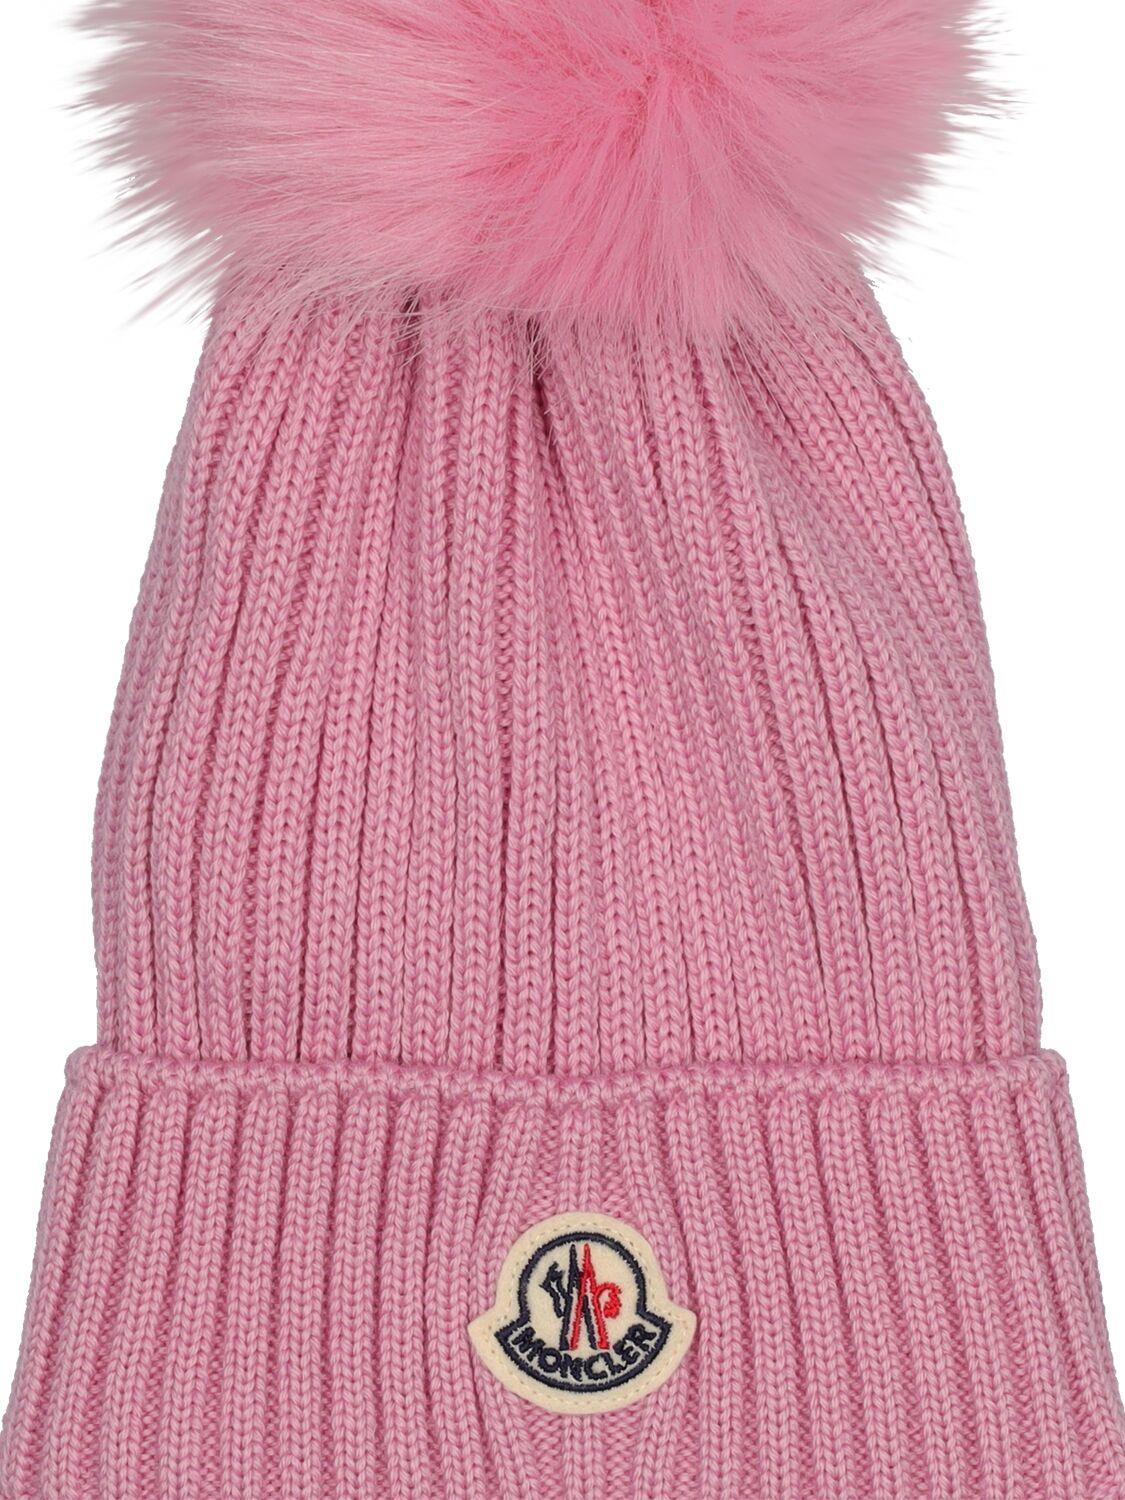 Shop Moncler Wool Beanie W/ Pompom In Light Pink